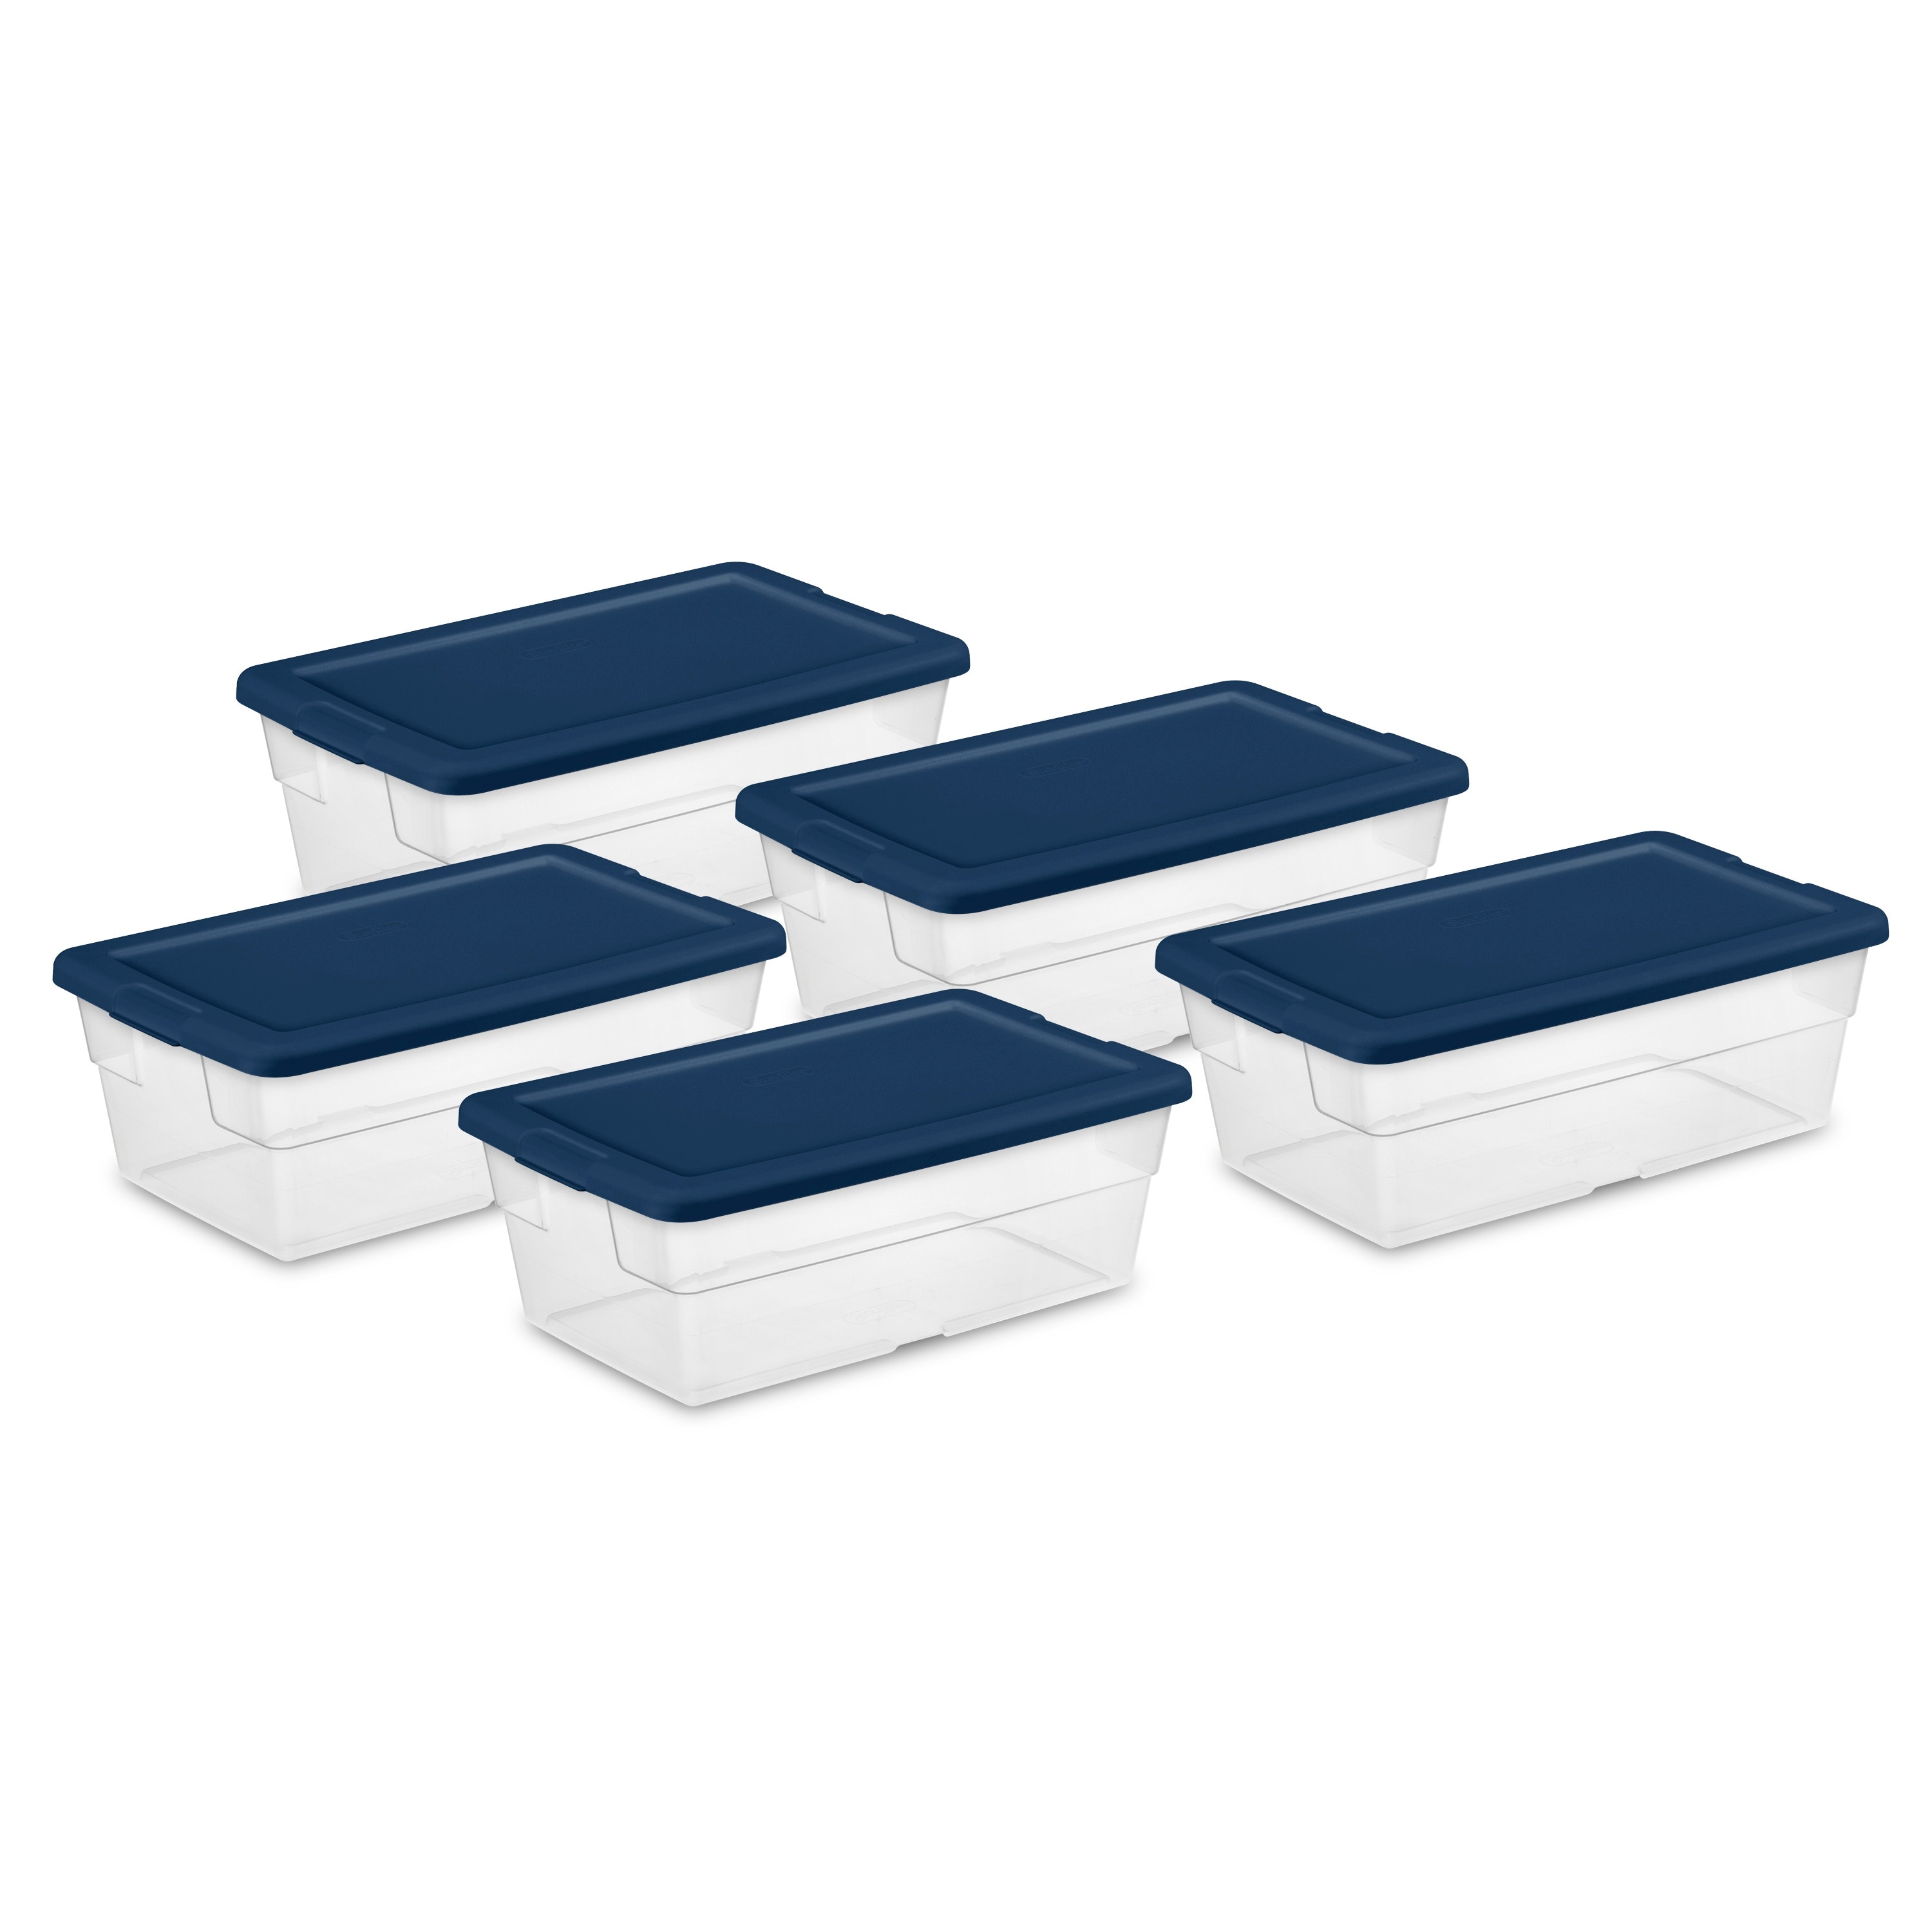 https://ak1.ostkcdn.com/images/products/is/images/direct/9ca09ad7ffe94f6737a57a3f730d7cc911151de9/Sterilite-Stackable-6-Qt-Storage-Box-Container%2C-Clear%2C-Marine-Blue-Lid-%2860-Pack%29.jpg